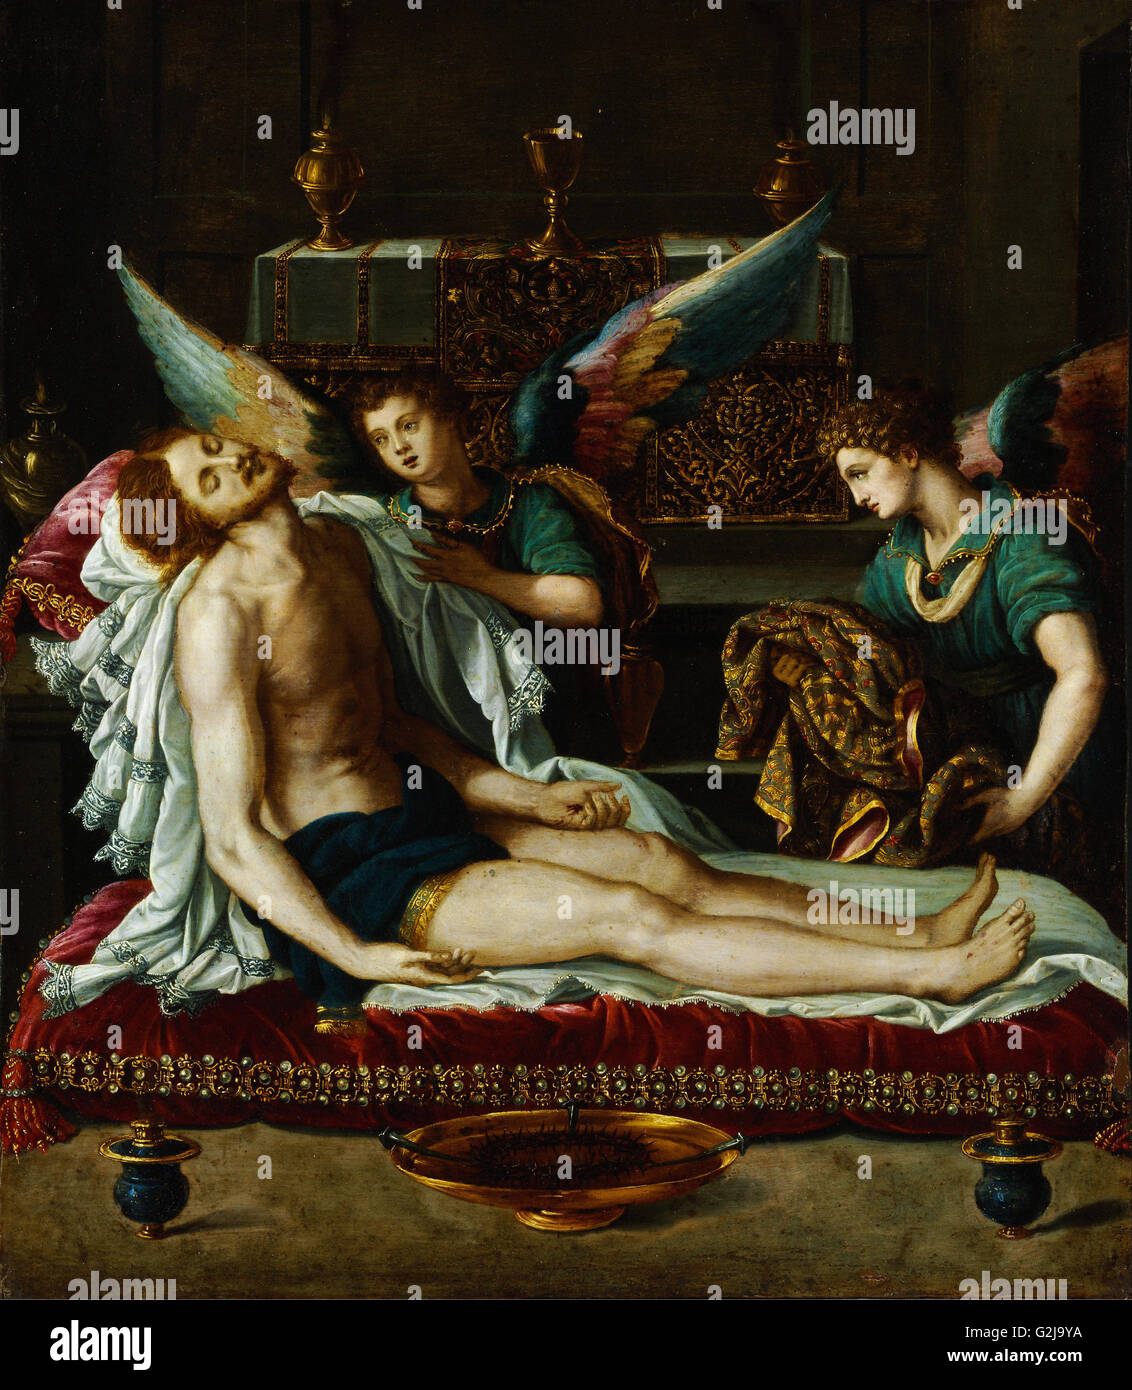 Alessandro Allori - The Body of Christ Anointed by Two Angels  - Museum of Fine Arts, Budapest Stock Photo